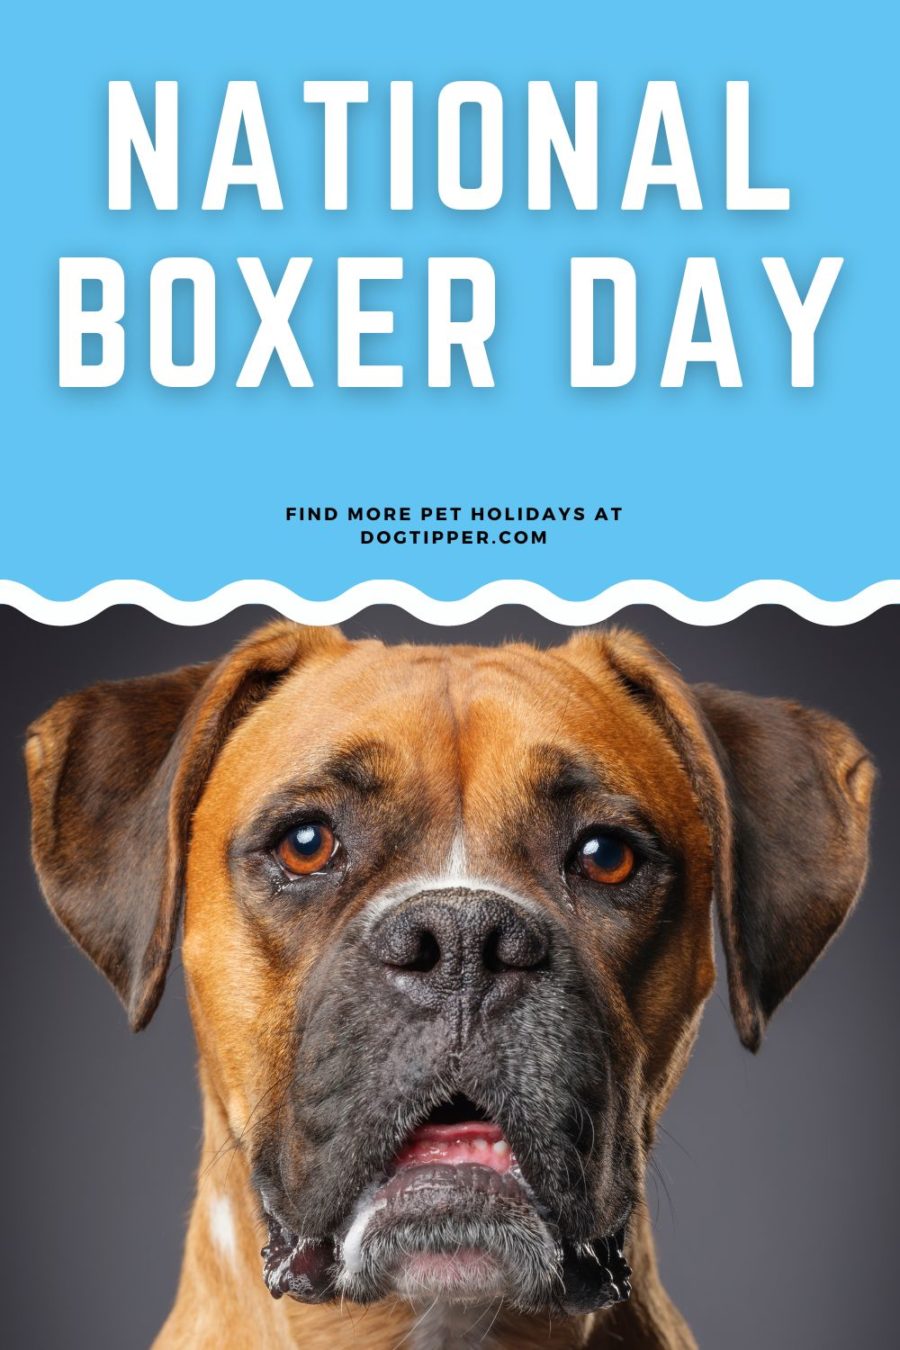 National Boxer Day